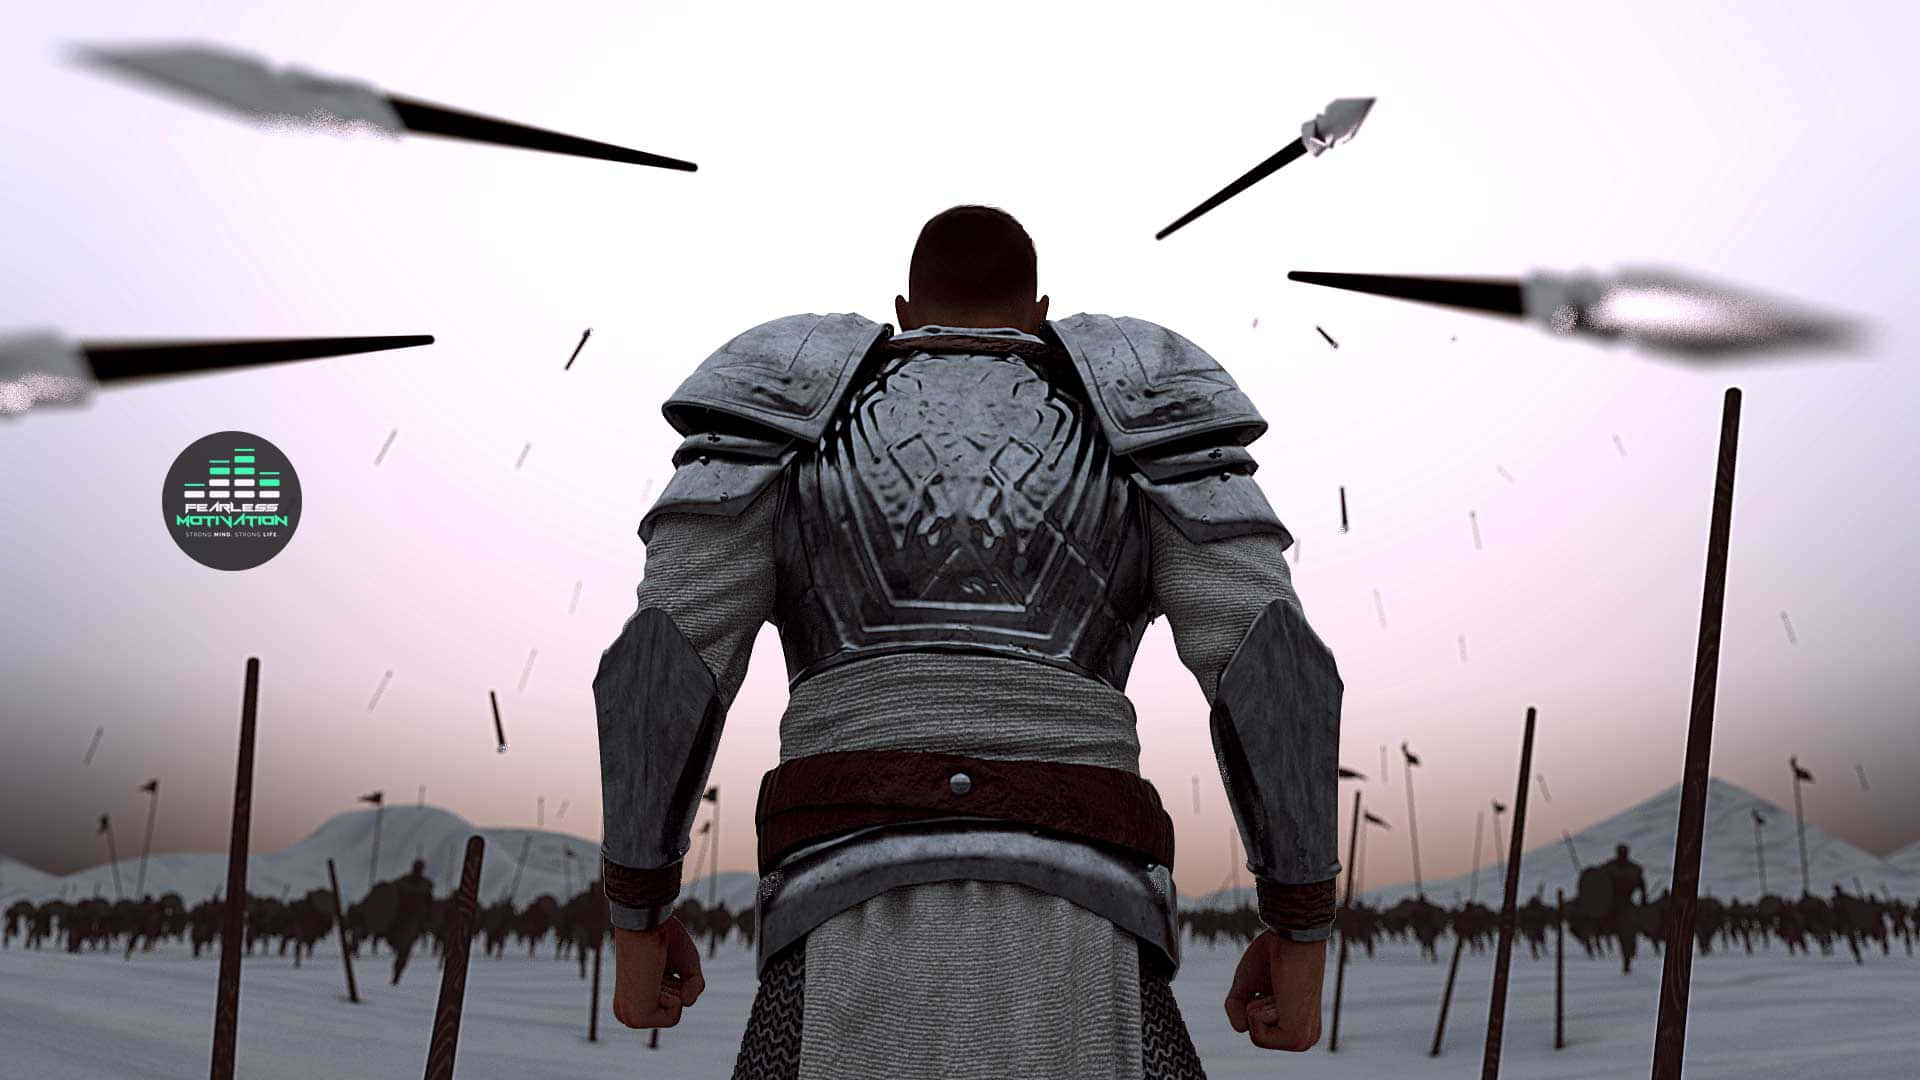 Best Mordhau Background Knight Facing Pikes